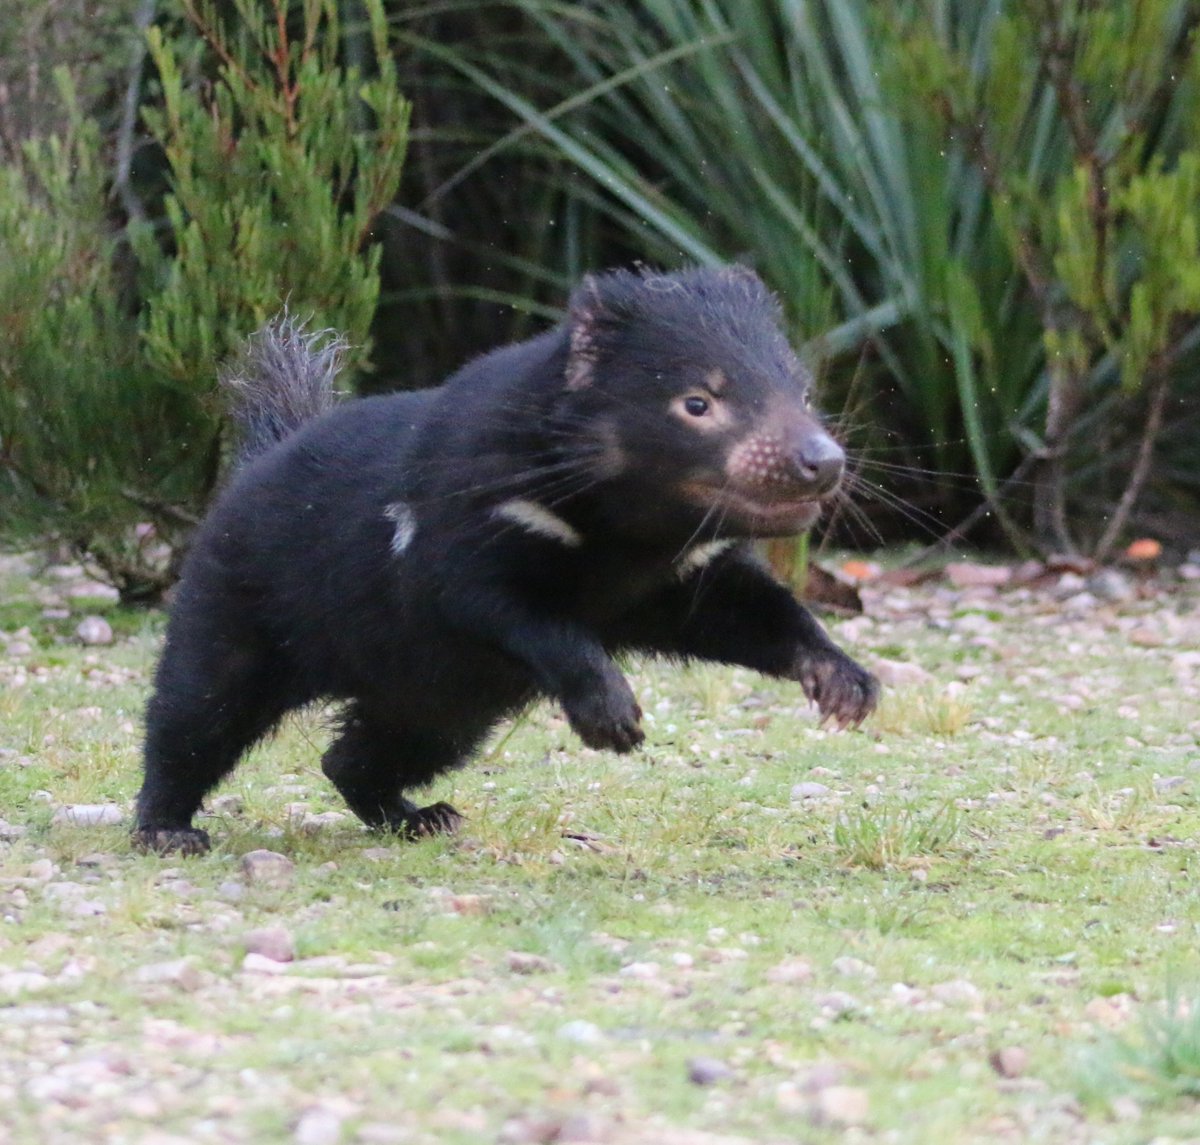 3) Tasmanian devils are apex predators?Open to interpretation, but definitely strong wording. Devils are the top of the food chain in Tassie (after we lost the thylacine), but they're mainly scavengers. They can certainly hunt, but they're not going to be running down kangaroos